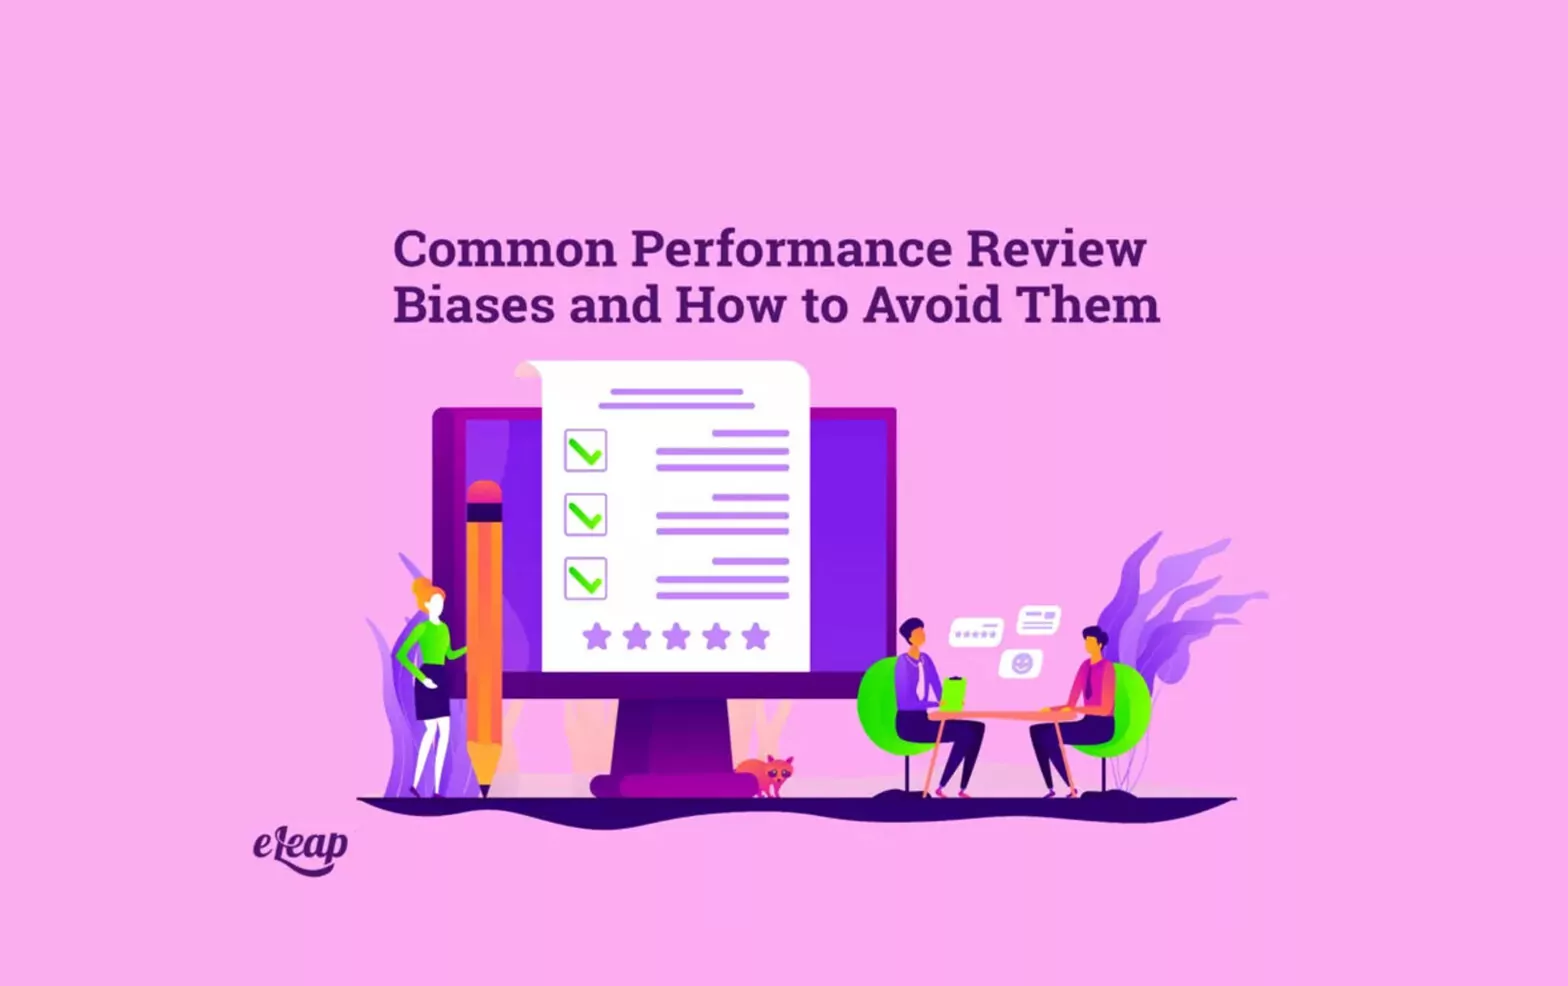 Common Performance Review Biases and How to Avoid Them